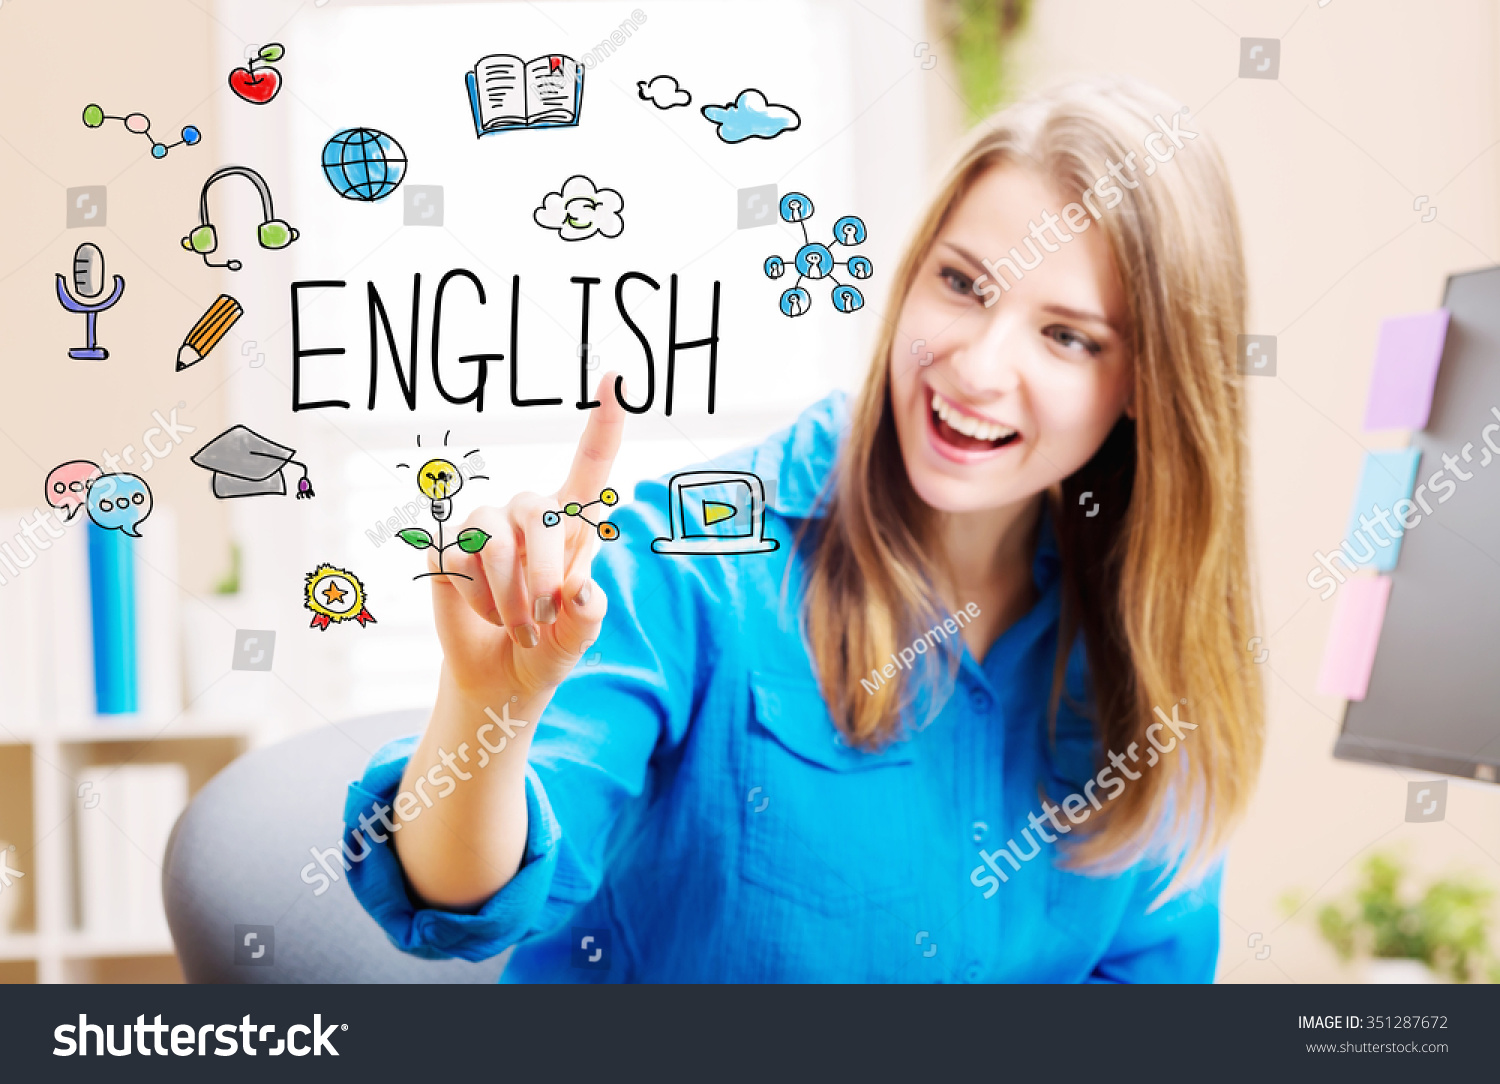 English concept with young woman in her home office #351287672